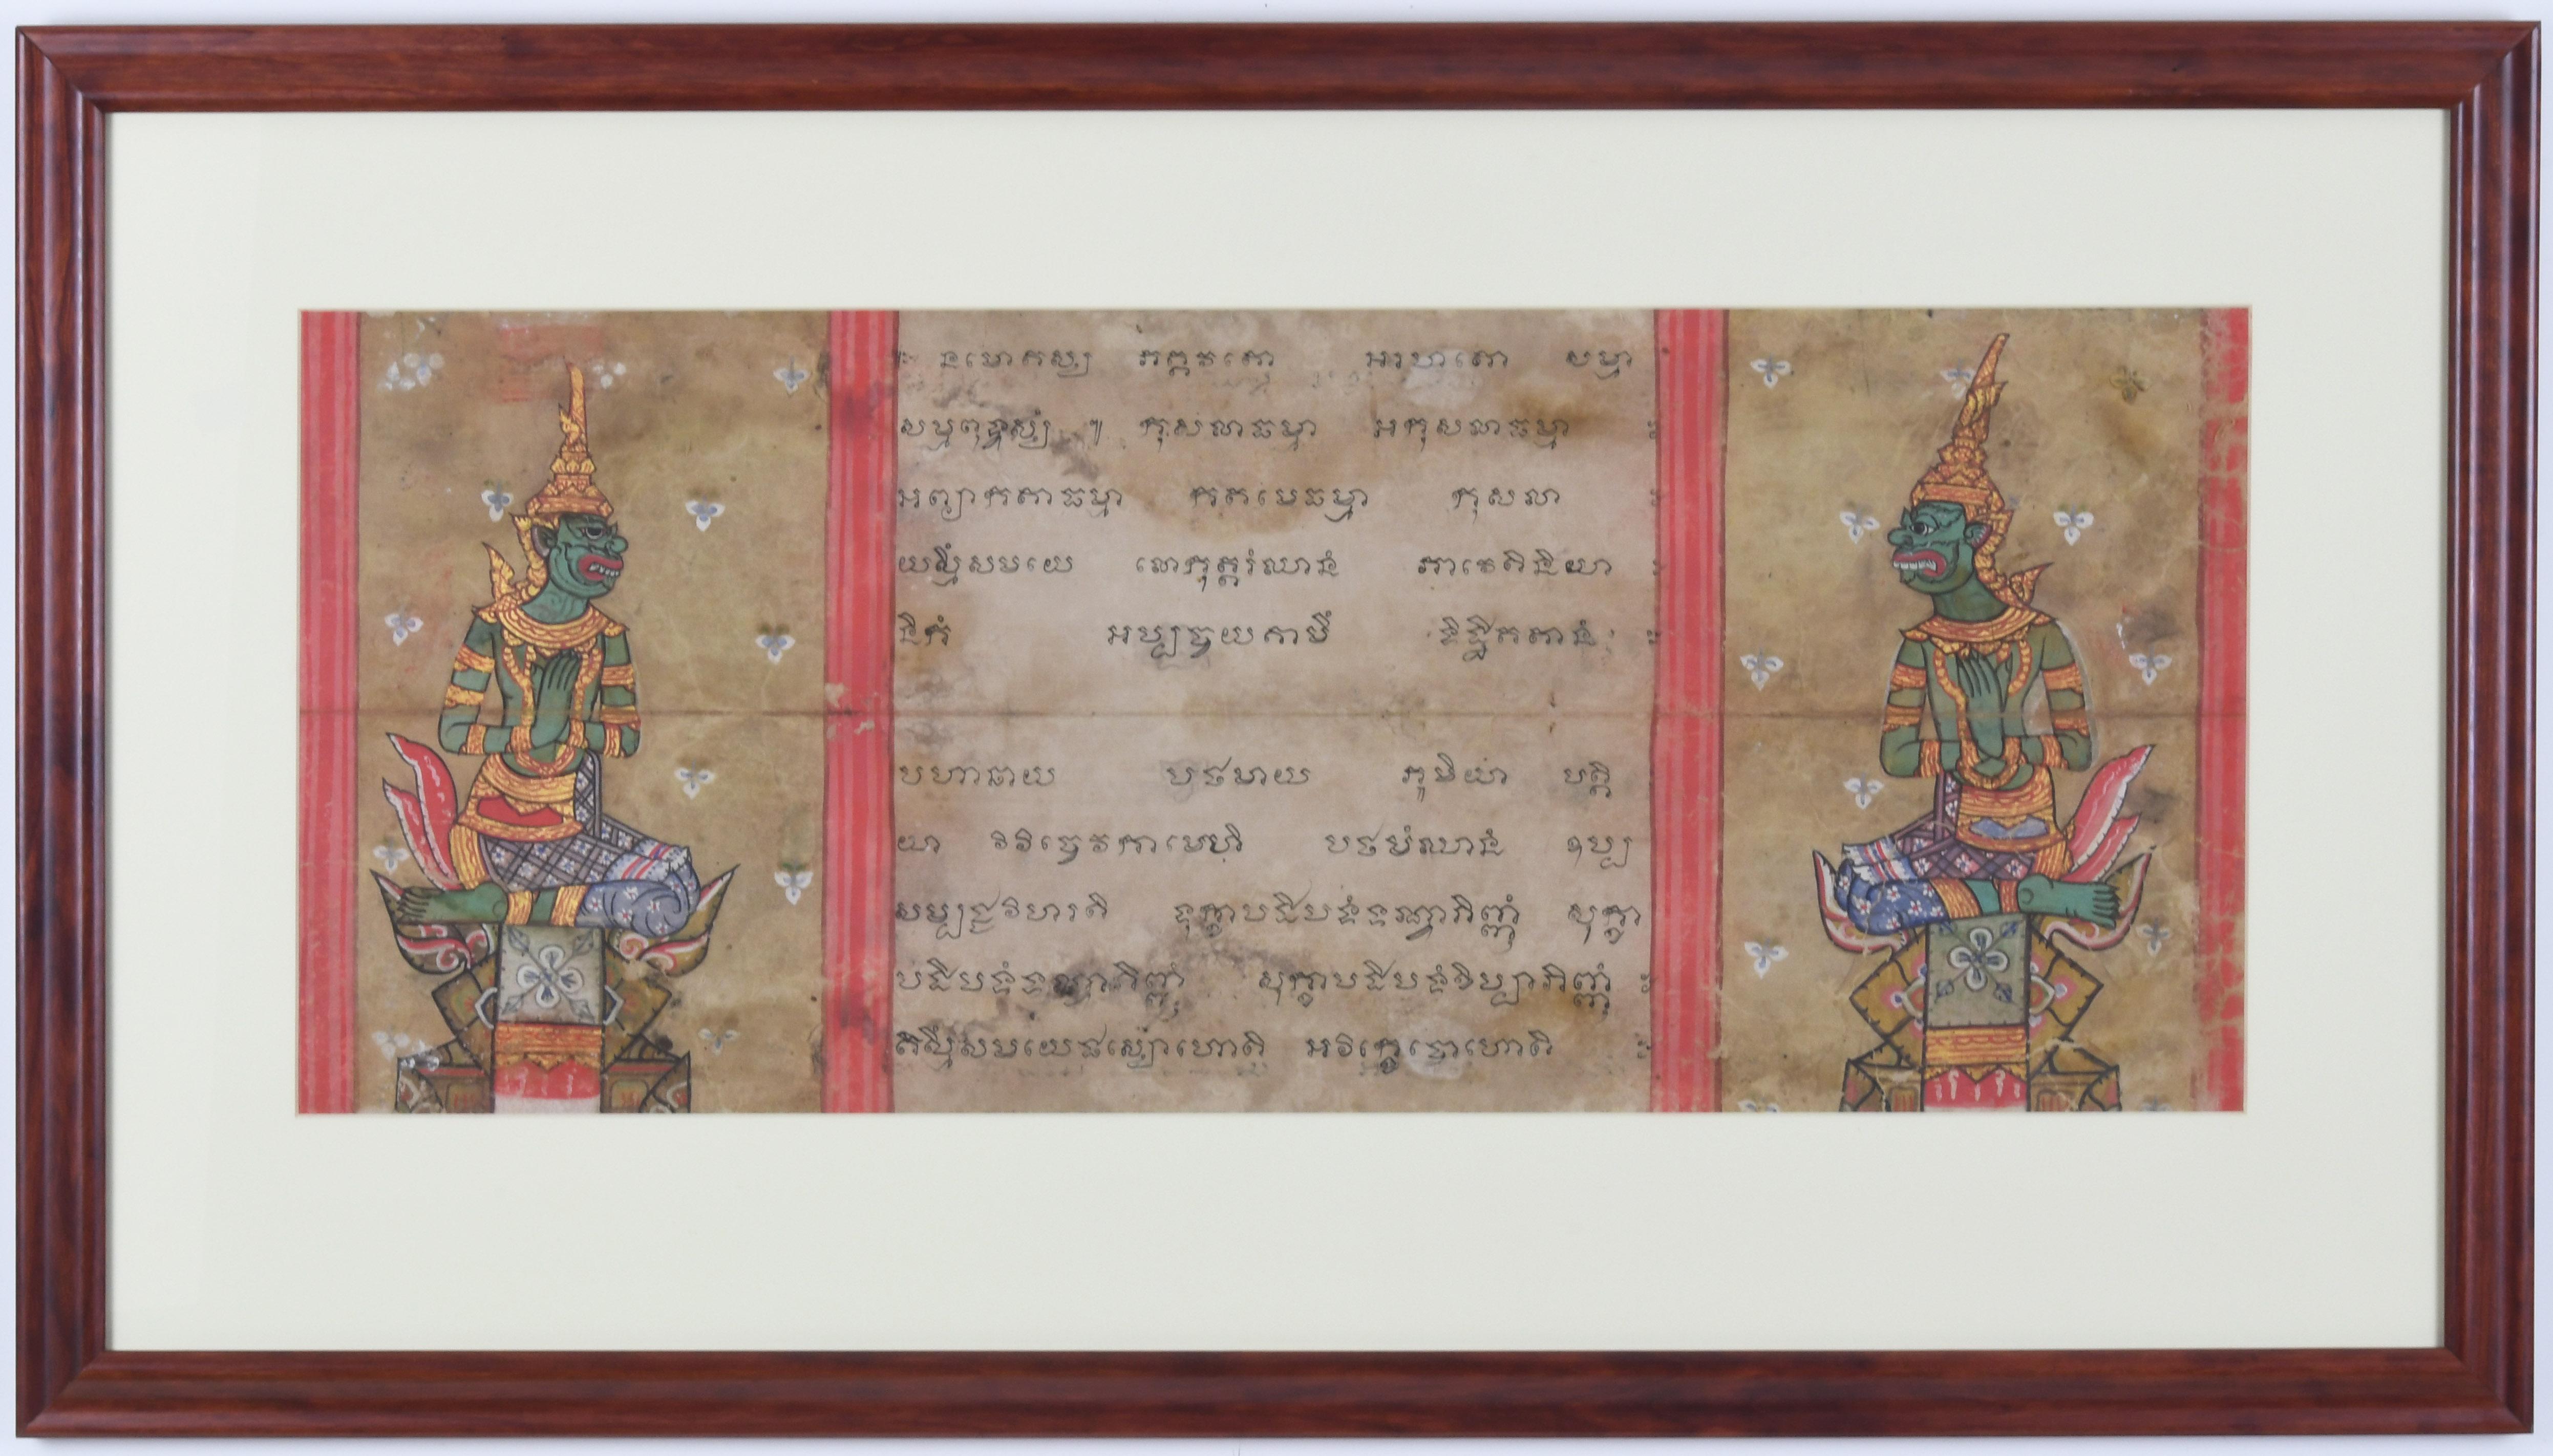 Unknown Artist, Thailand, 19th century
Two Miniatures and text from the 